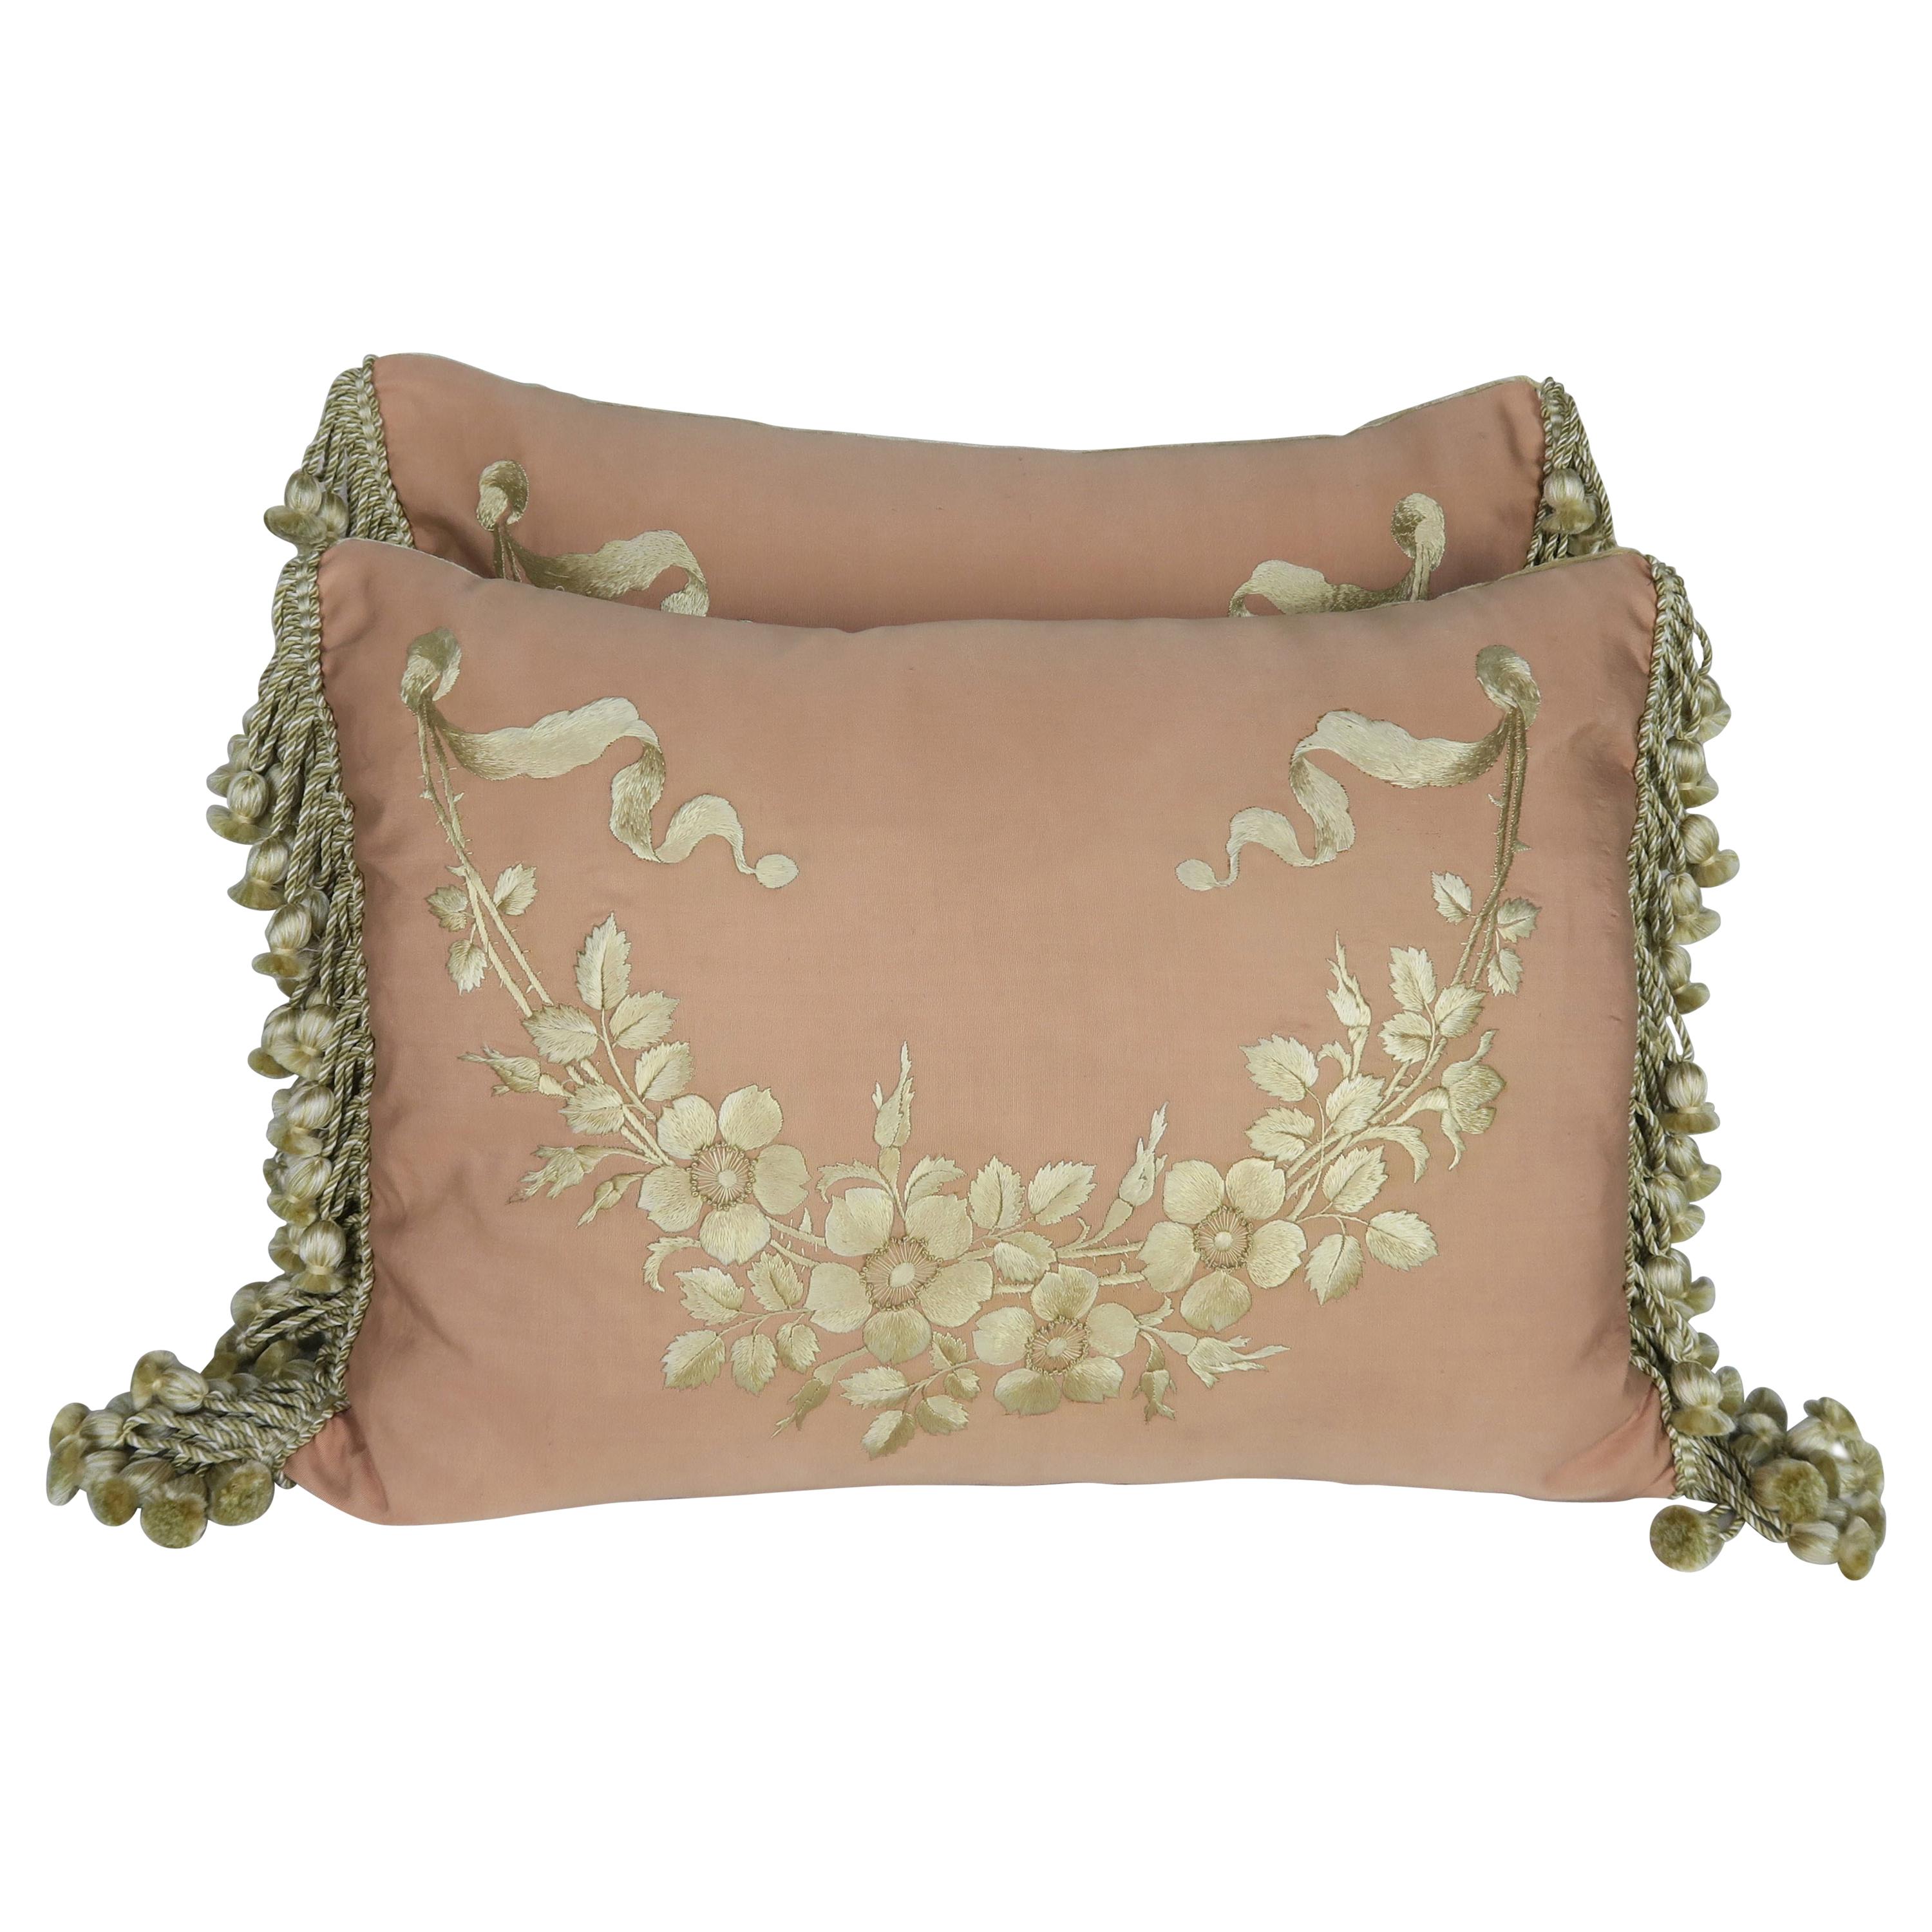 Custom Embroidered Antique Silk Floral Pillows by Melissa Levinson